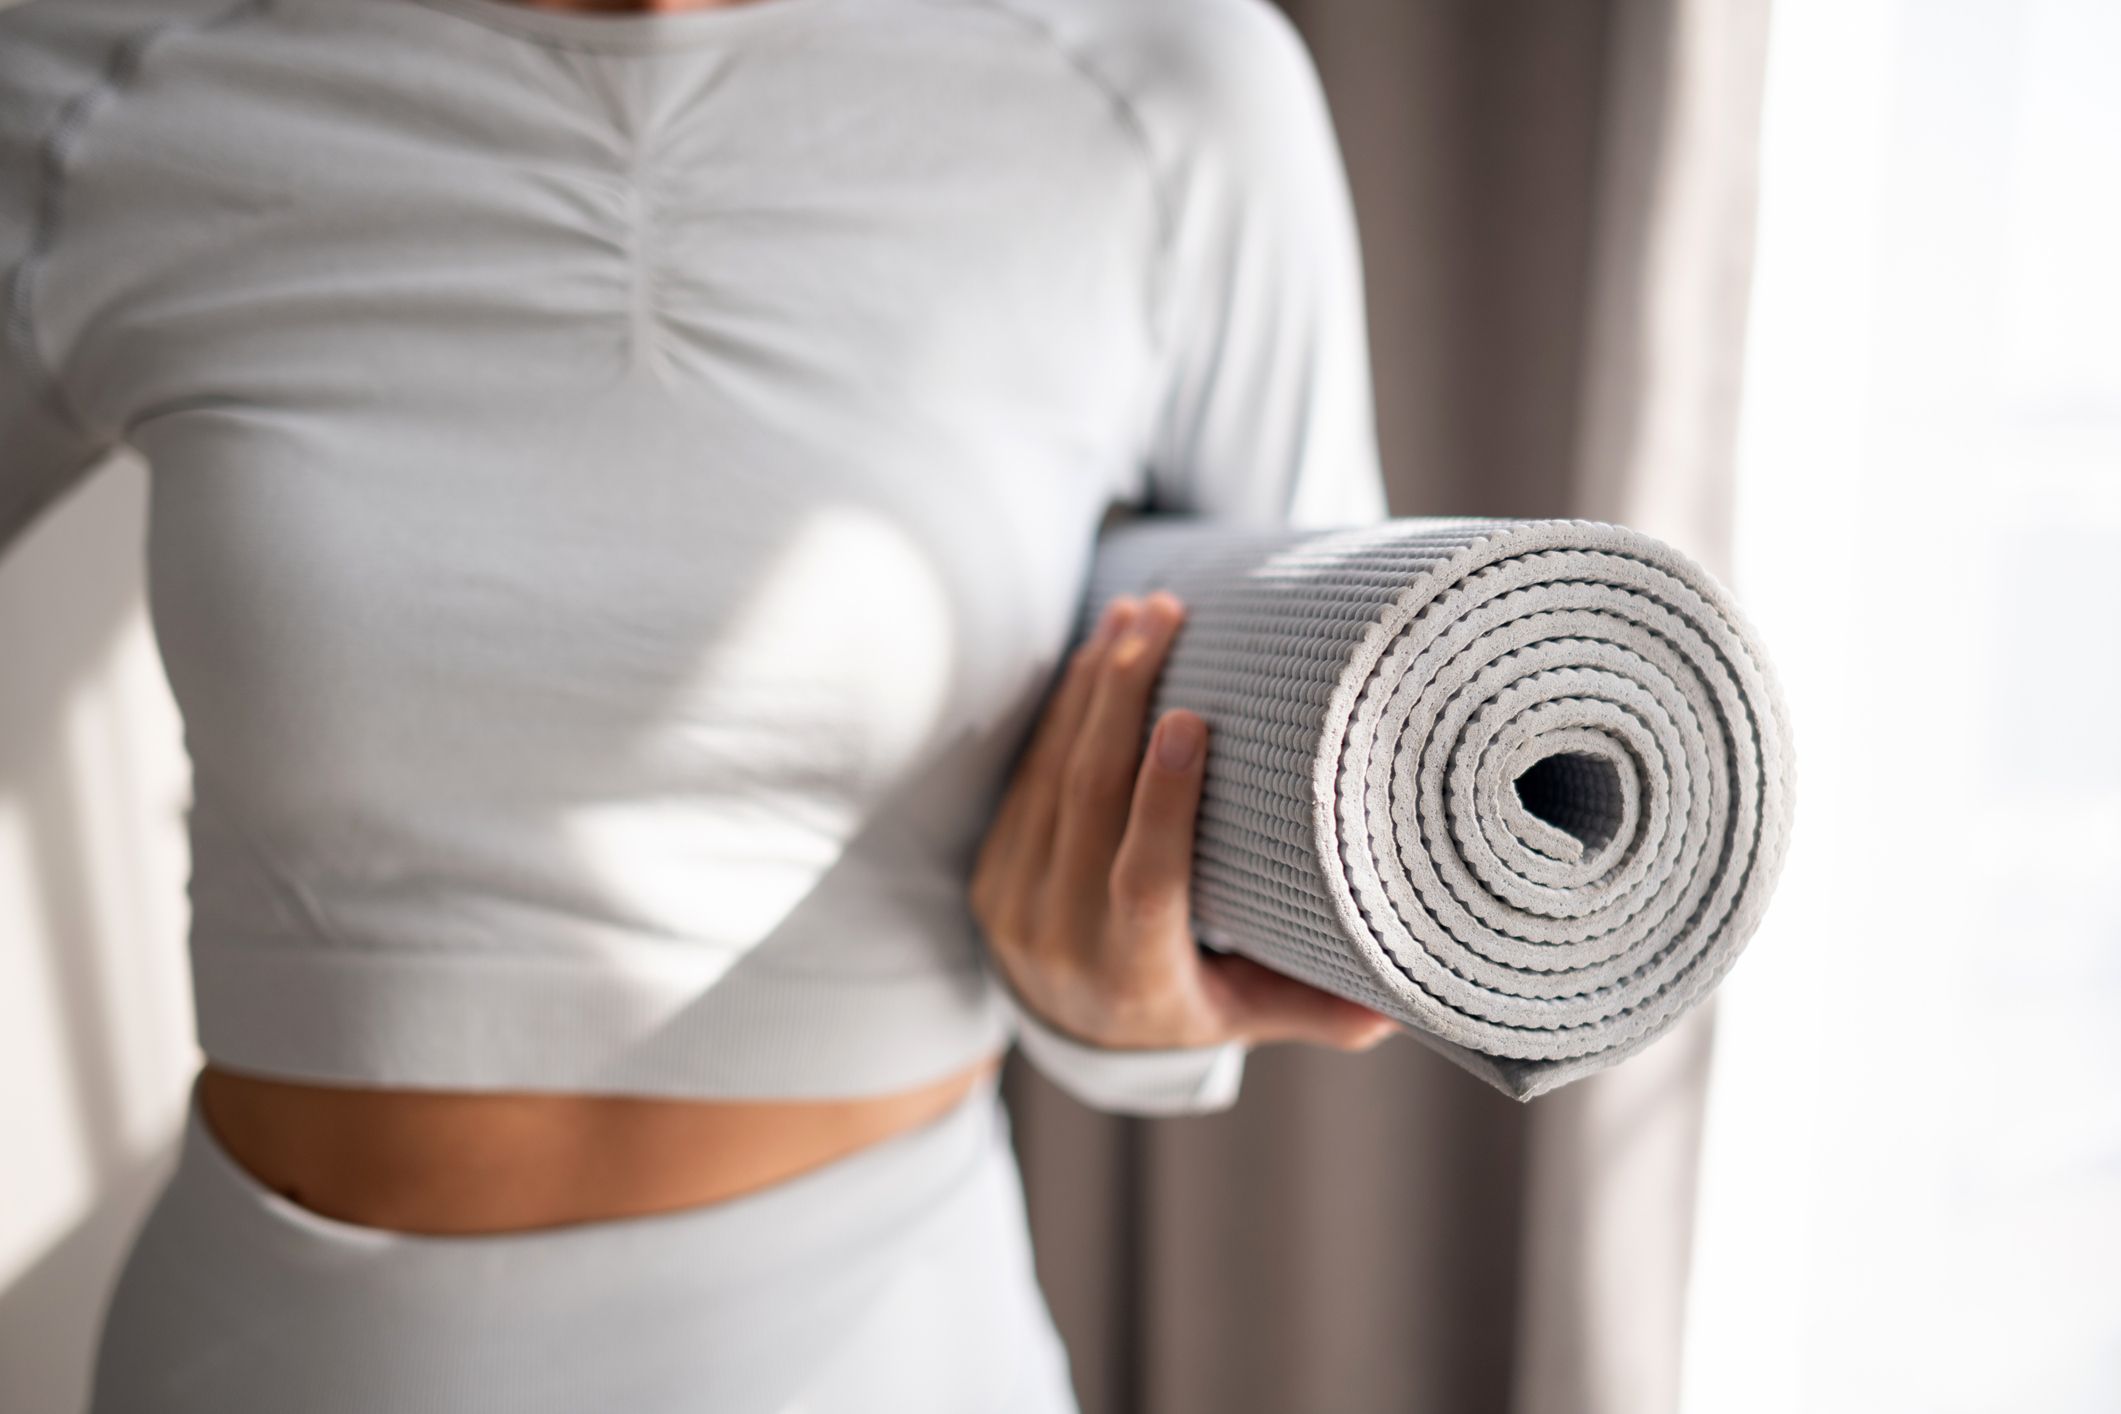 <p class="body-dropcap">Though the best yoga mats are a common <a href="https://www.harpersbazaar.com/beauty/health/g23900366/best-fitness-gifts-ideas/">fitness</a> staple, you need to find the right style of mat for the way you practice. "We suggest selecting a mat based on what features are most important to the individual, as each person’s practice is so personal and can vary widely," certified yoga teacher and <a href="https://go.redirectingat.com?id=74968X1553576&url=https%3A%2F%2Fwww.manduka.com%2F&sref=https%3A%2F%2Fwww.harpersbazaar.com%2Fbeauty%2Fdiet-fitness%2Fg45221676%2Fbest-yoga-mats%2F">Manduka</a> expert Shawna Barr tells <em>Bazaar</em>. </p><p class="body-text">If you've been on the hunt for a new mat for a while, there's a good chance you're wondering what their individual measurements stand for. According to yoga expert and <a href="https://go.redirectingat.com?id=74968X1553576&url=https%3A%2F%2Fwww.alomoves.com%2F&sref=https%3A%2F%2Fwww.harpersbazaar.com%2Fbeauty%2Fdiet-fitness%2Fg45221676%2Fbest-yoga-mats%2F">Alo Moves</a> instructor <a href="https://www.instagram.com/christajanine/?hl=en">Christa Janine</a>, the lower a mat's millimeter number, the thinner it is, and vice versa. </p><p class="body-text">"Thinner mats that are 1.5 to 2 millimeters are typically best for travel, since they're lighter and more compact," she says. "5 or 6 millimeter mats are thicker, and more ideal for regular use, especially for those needed a little more cushion to protect their knees." Janine also notes to look for mats with built-in slip resistance, since they're designed to become grippier and more sturdy as you sweat. </p><p class="body-text">For the best yoga mats editors, experts, and shoppers are giving gold stars, read on for our short list of favorites worthy of any type of flow. </p><p><a href="https://www.harpersbazaar.com/beauty/health/g44843558/best-meditation-cushions/"><strong>Related: The Best Meditation Cushions to Ground Your Practice</strong></a></p>